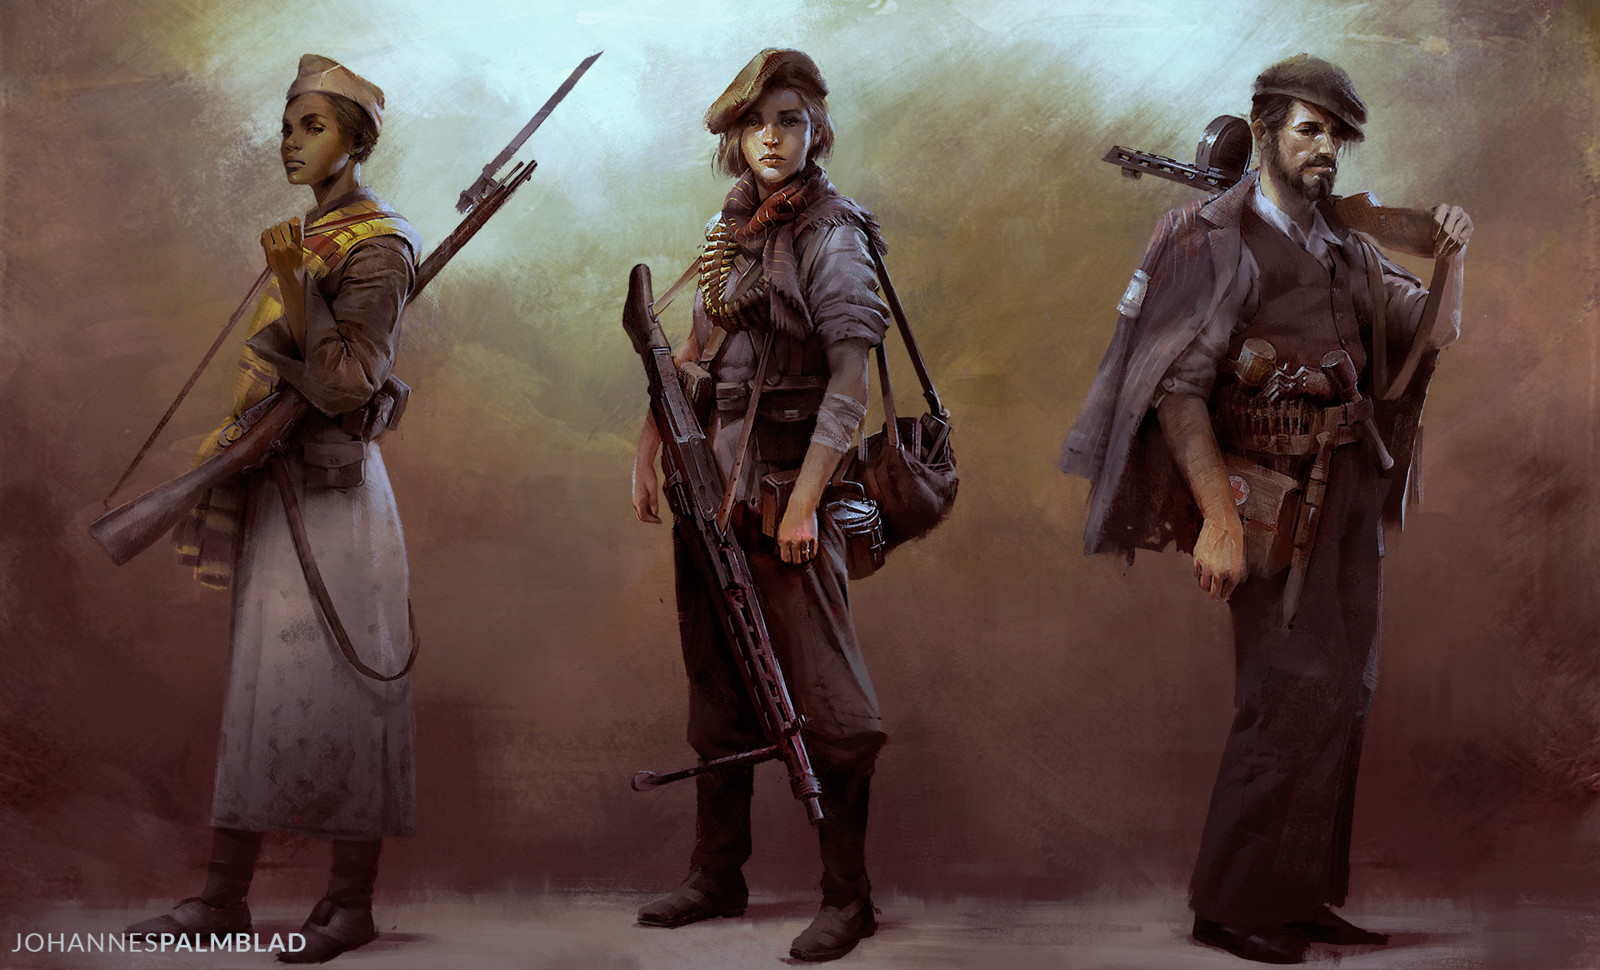 Character designs for the three fighters from different partisan factions during World War 2 and the interwar period.